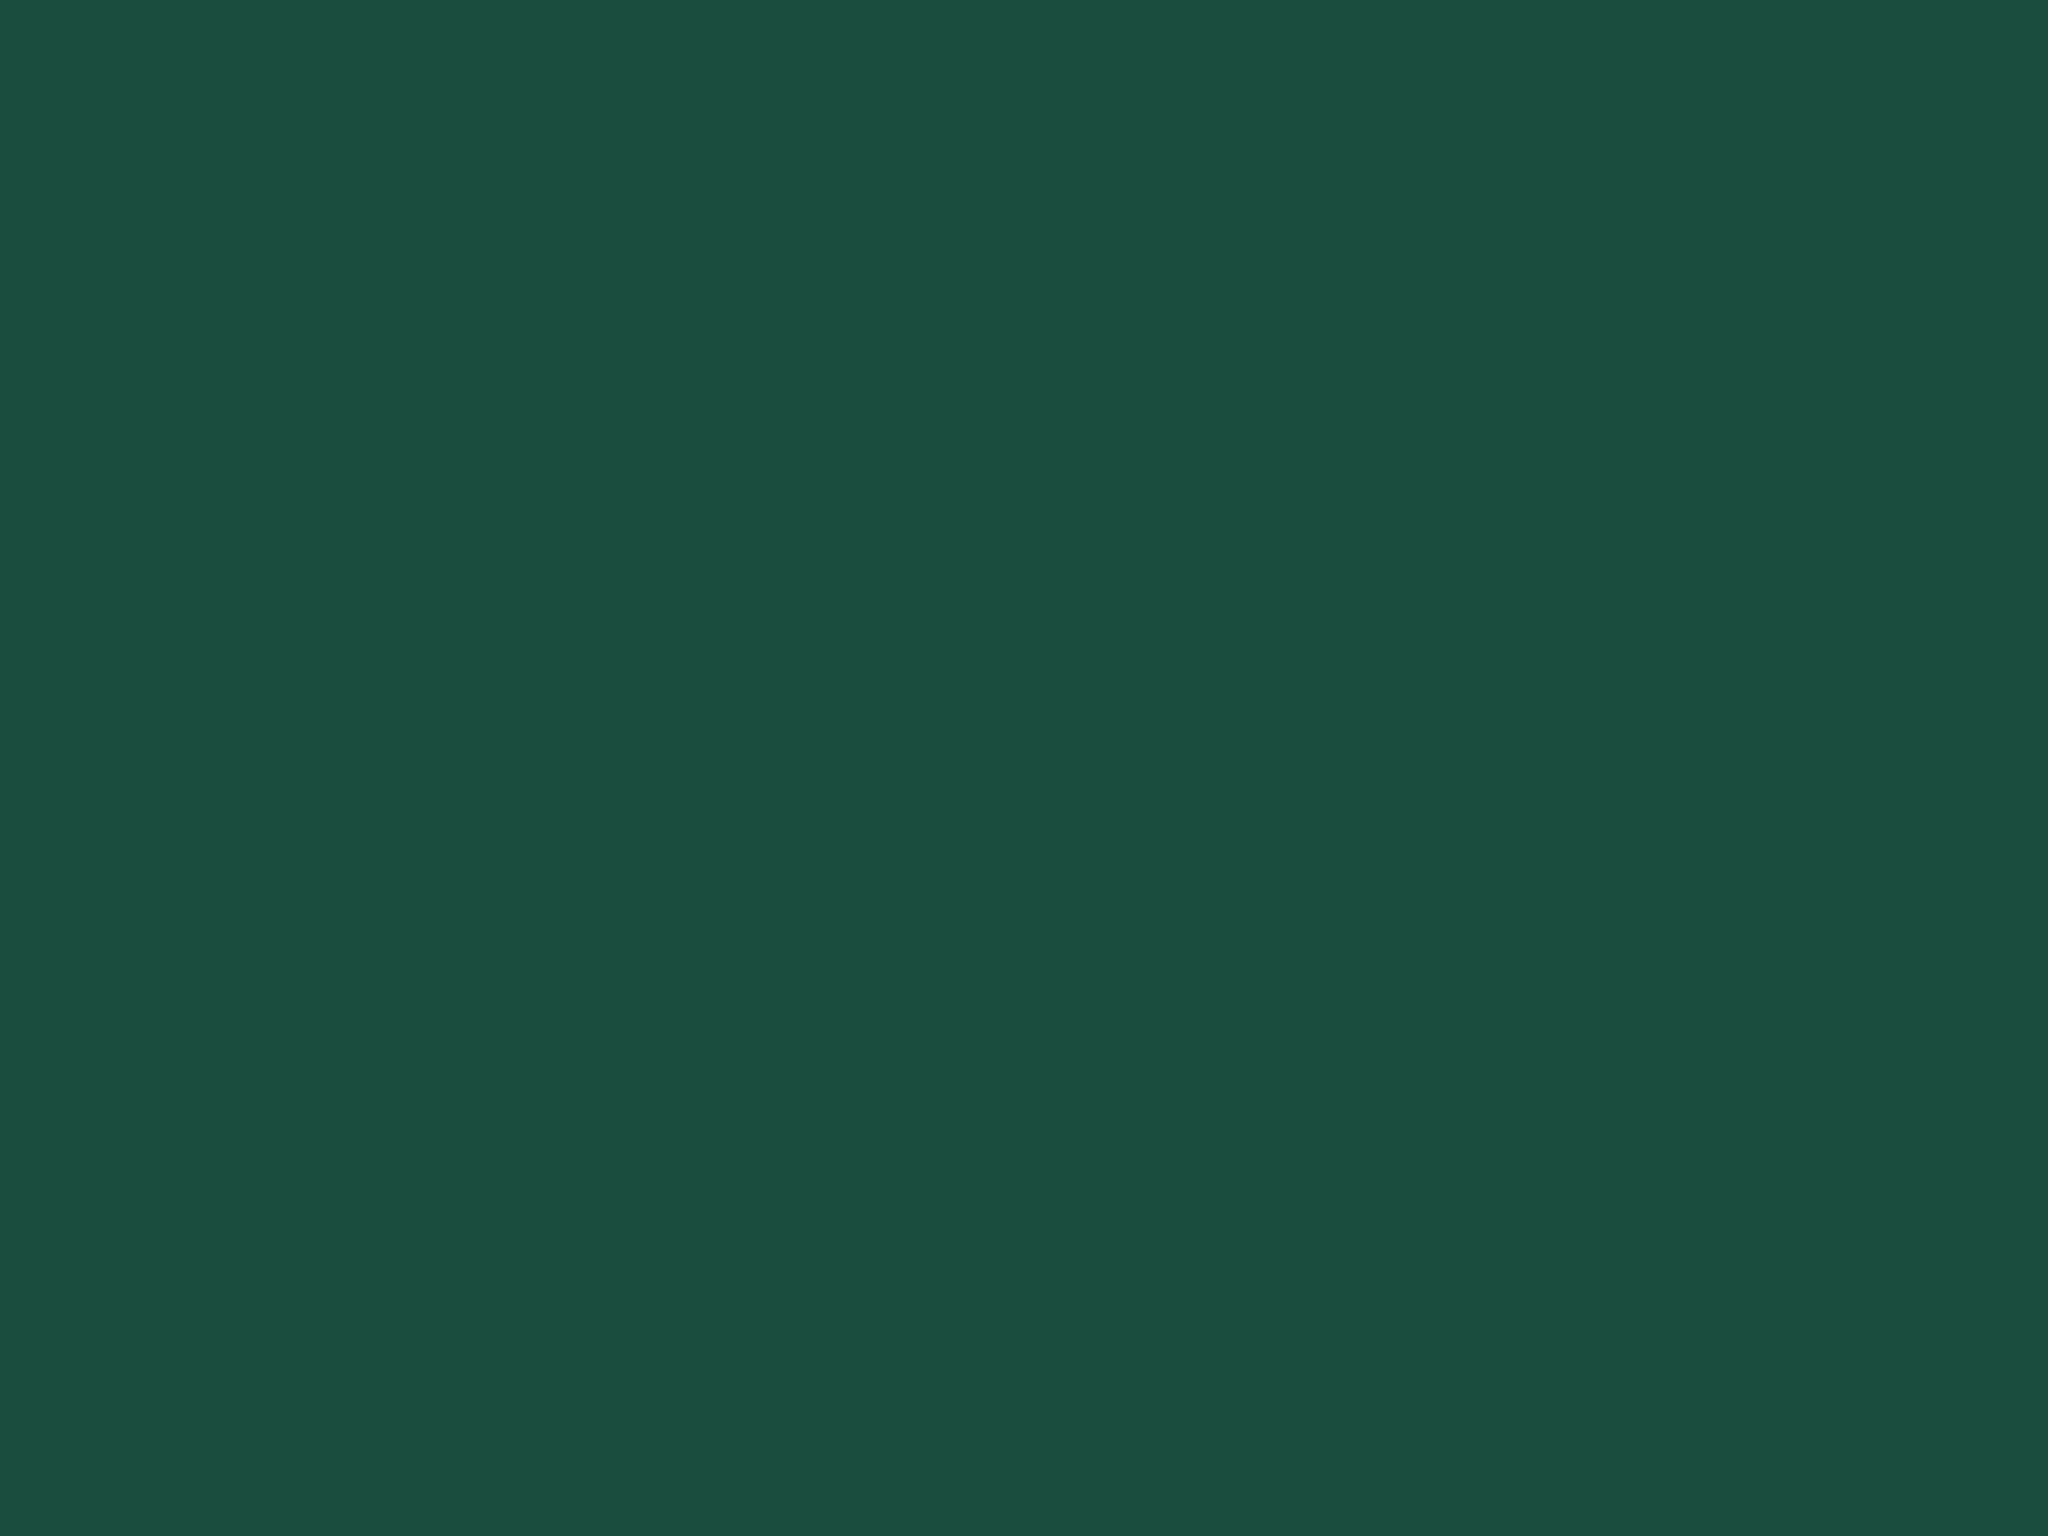 2048x1536 Brunswick Green Solid Color Background